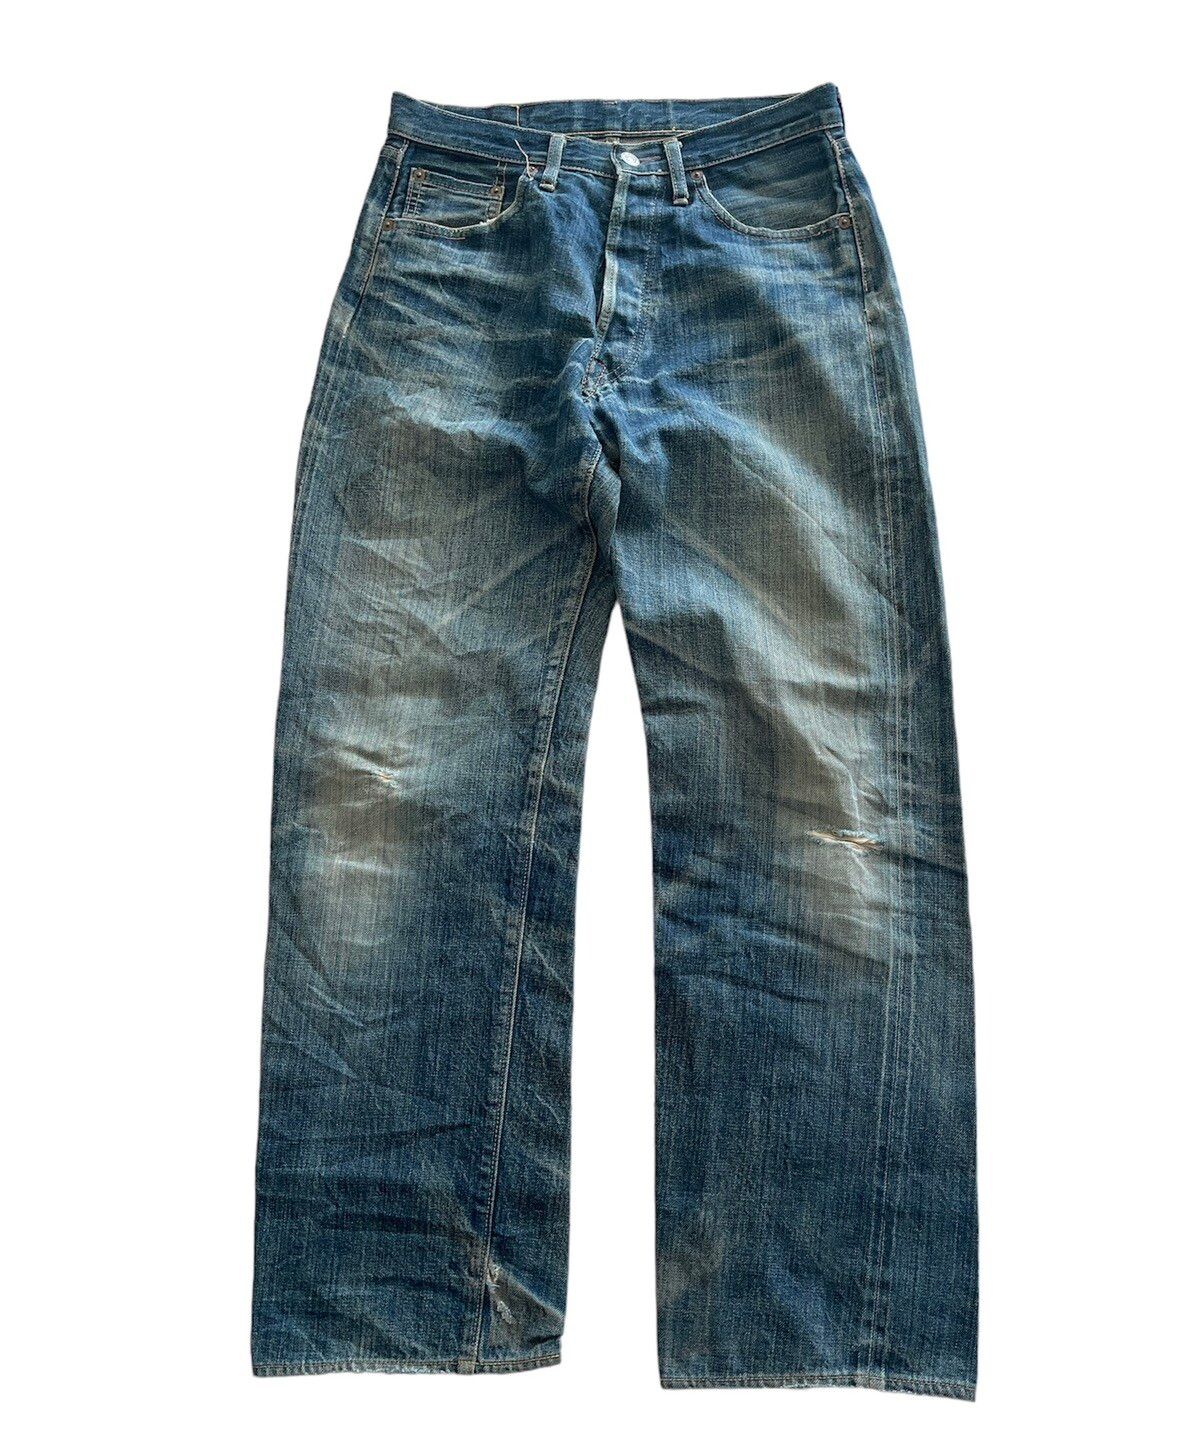 Japanese Brand - JAPANESE REPRO DENIM JEANS, BARNS OUTFITTERS & CO BRAND - 1